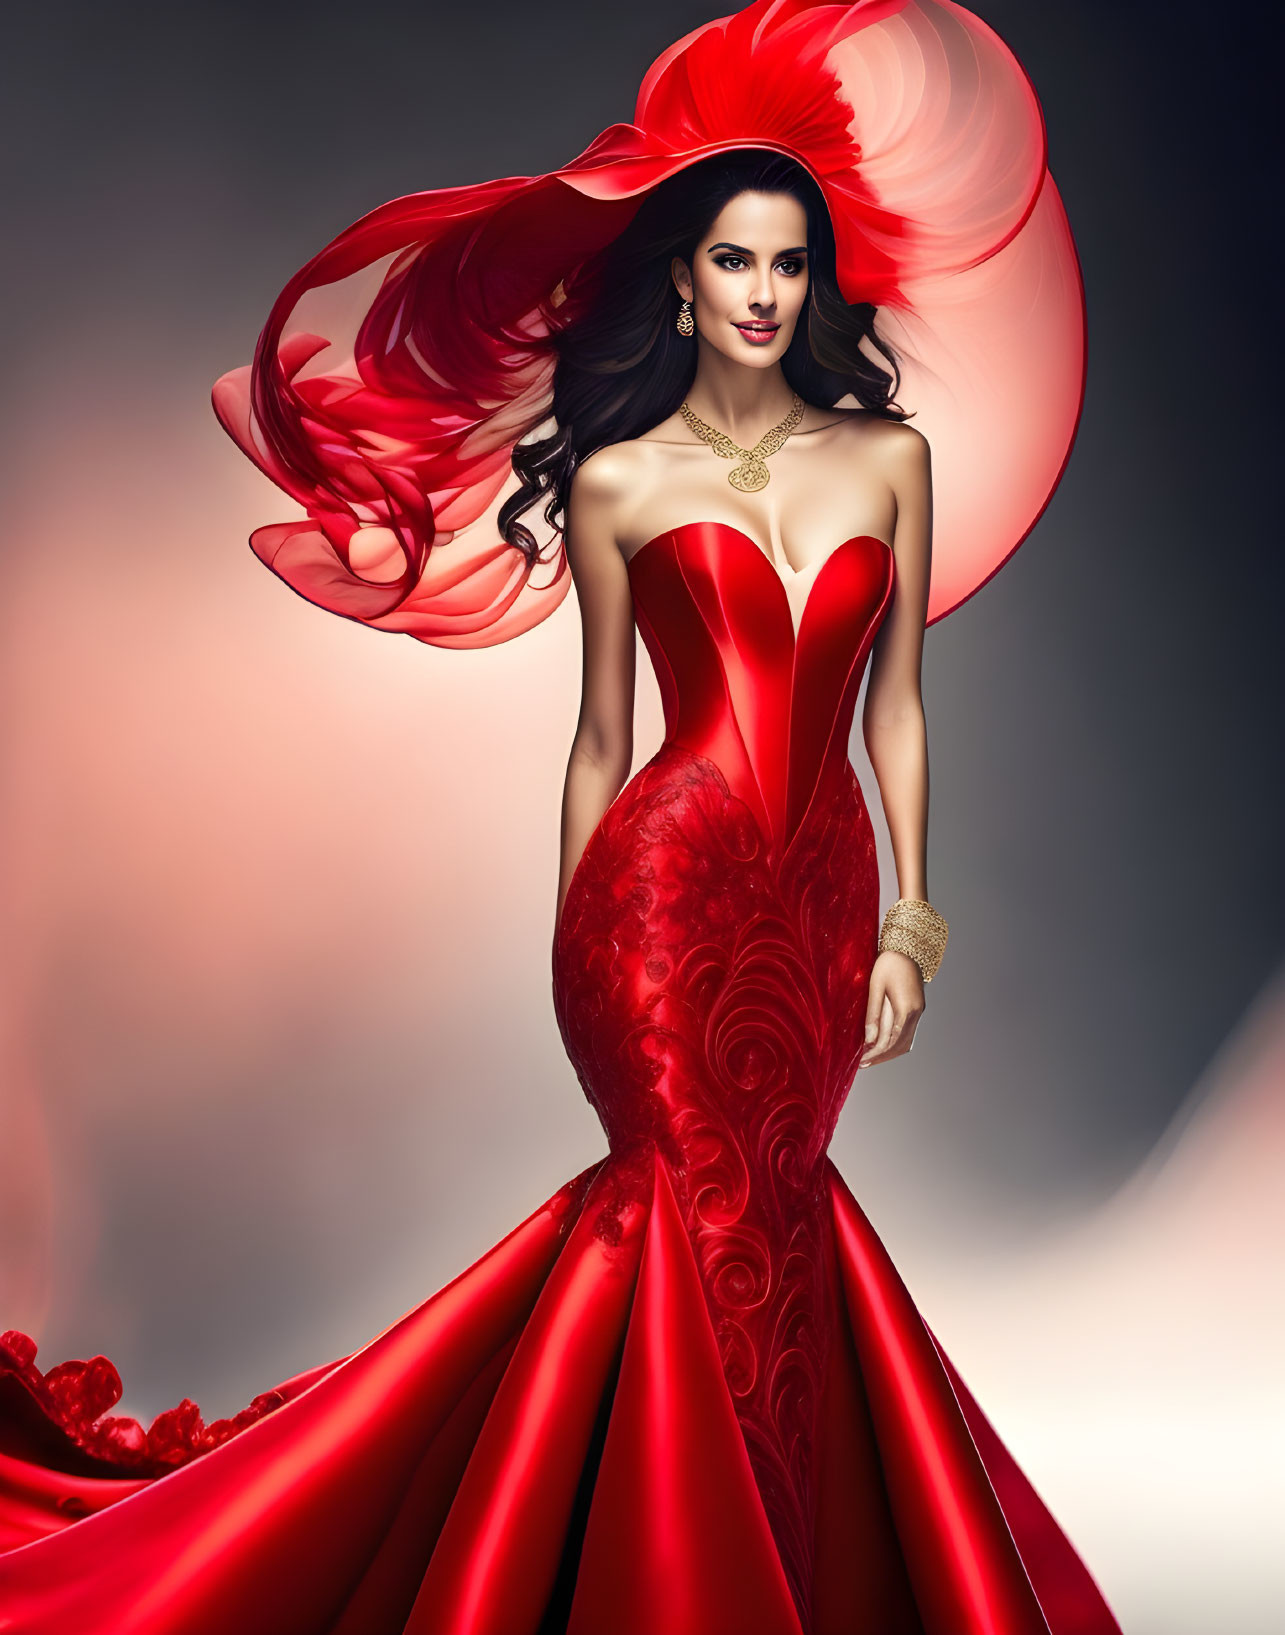 Elegant woman in red gown with flowing train and dramatic hat against gradient background wearing jewelry